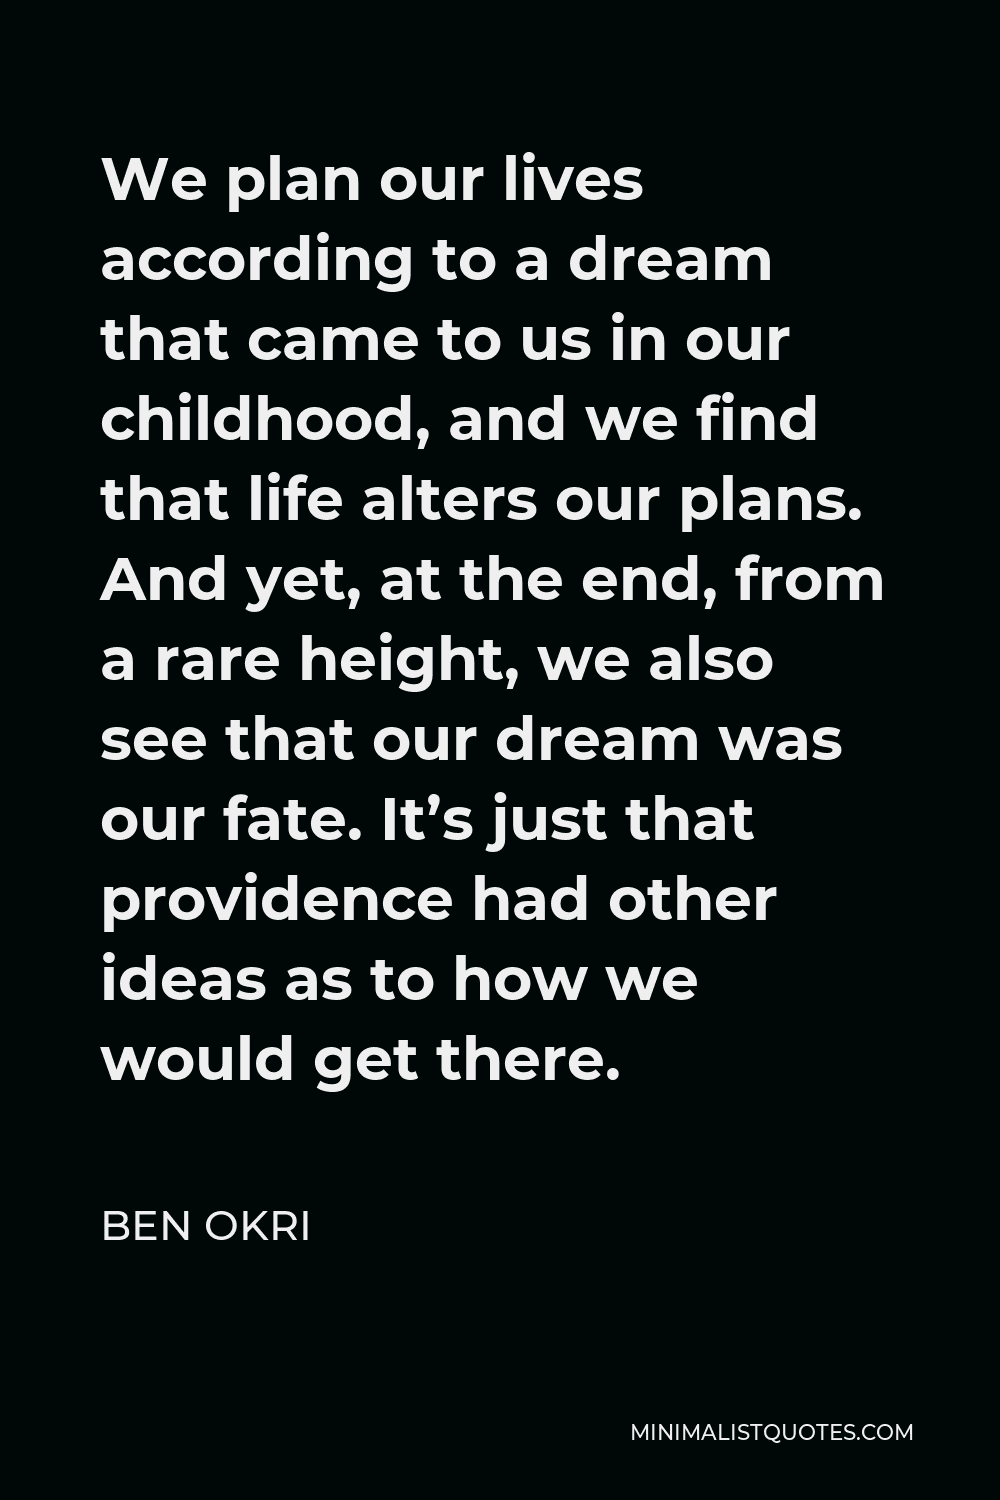 Ben Okri Quote - We plan our lives according to a dream that came to us in our childhood, and we find that life alters our plans. And yet, at the end, from a rare height, we also see that our dream was our fate. It’s just that providence had other ideas as to how we would get there.